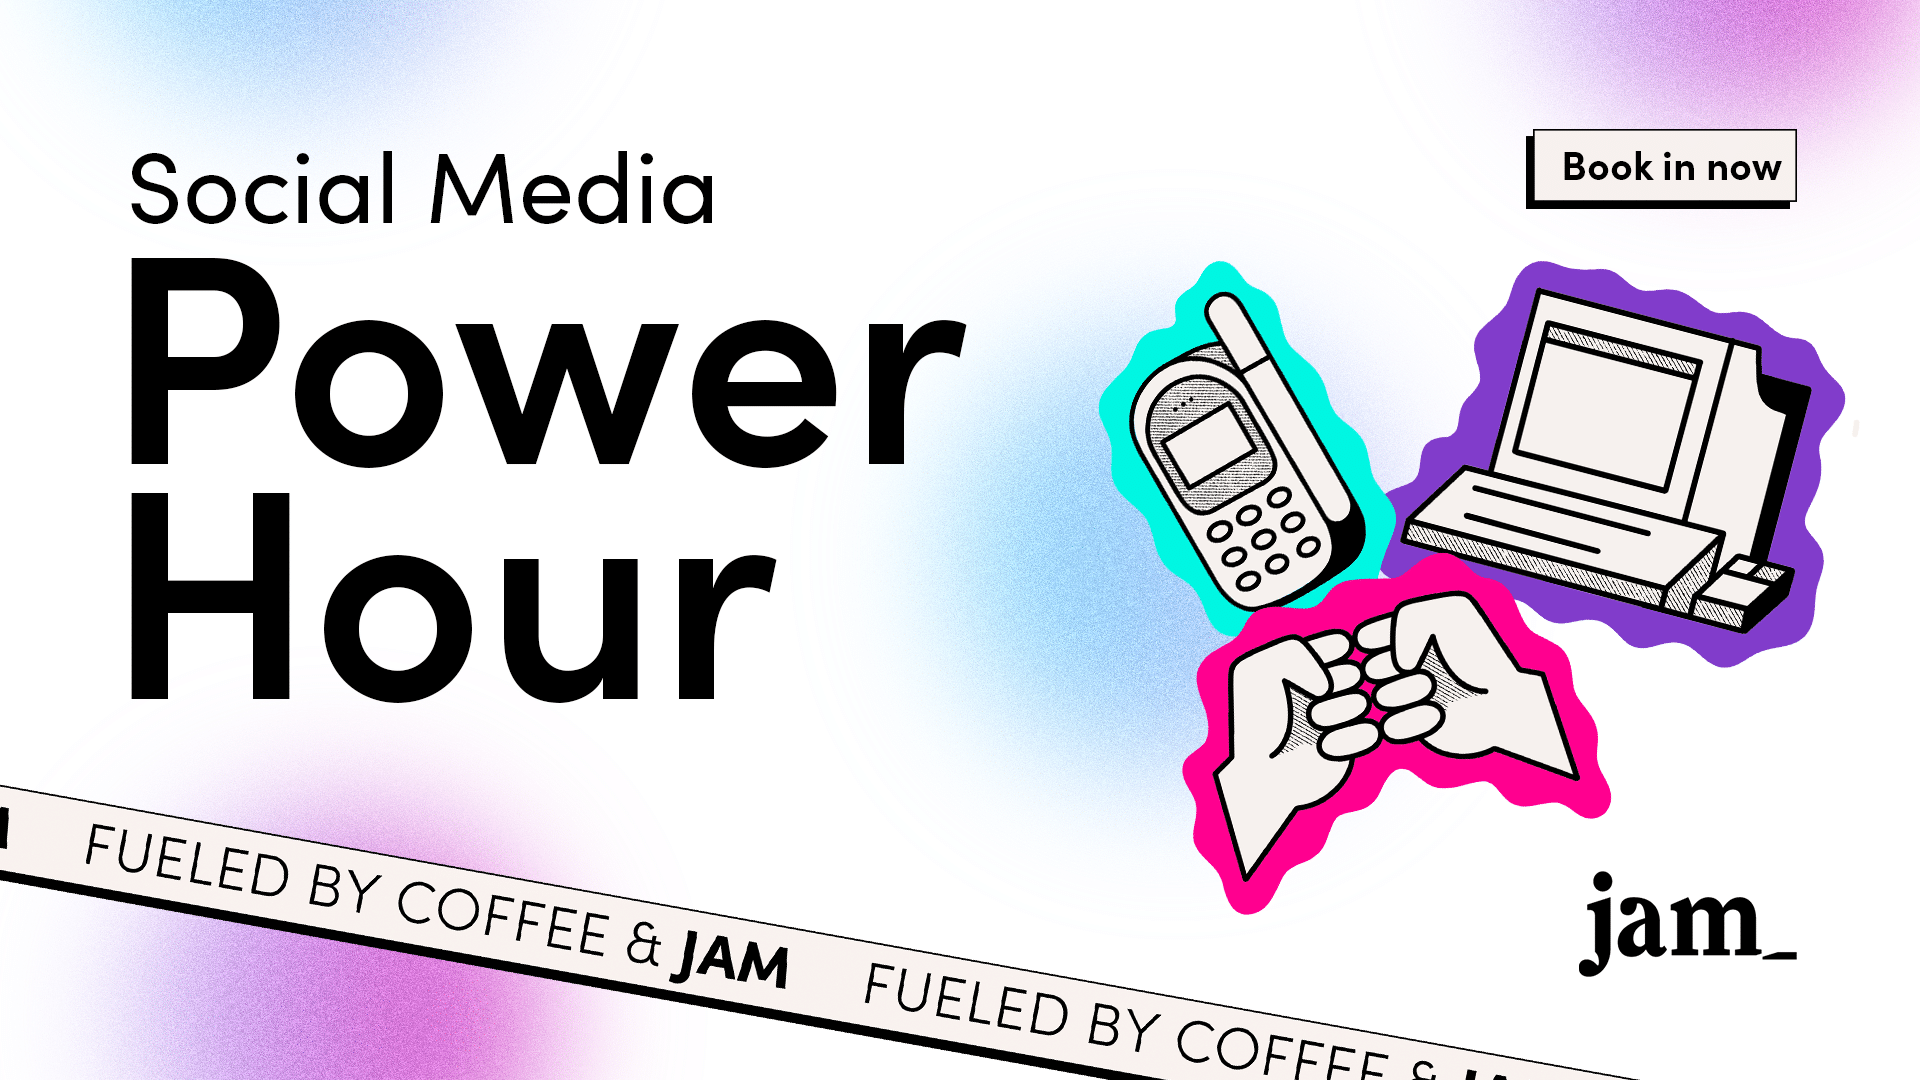 Book in for a free social media power hour session today